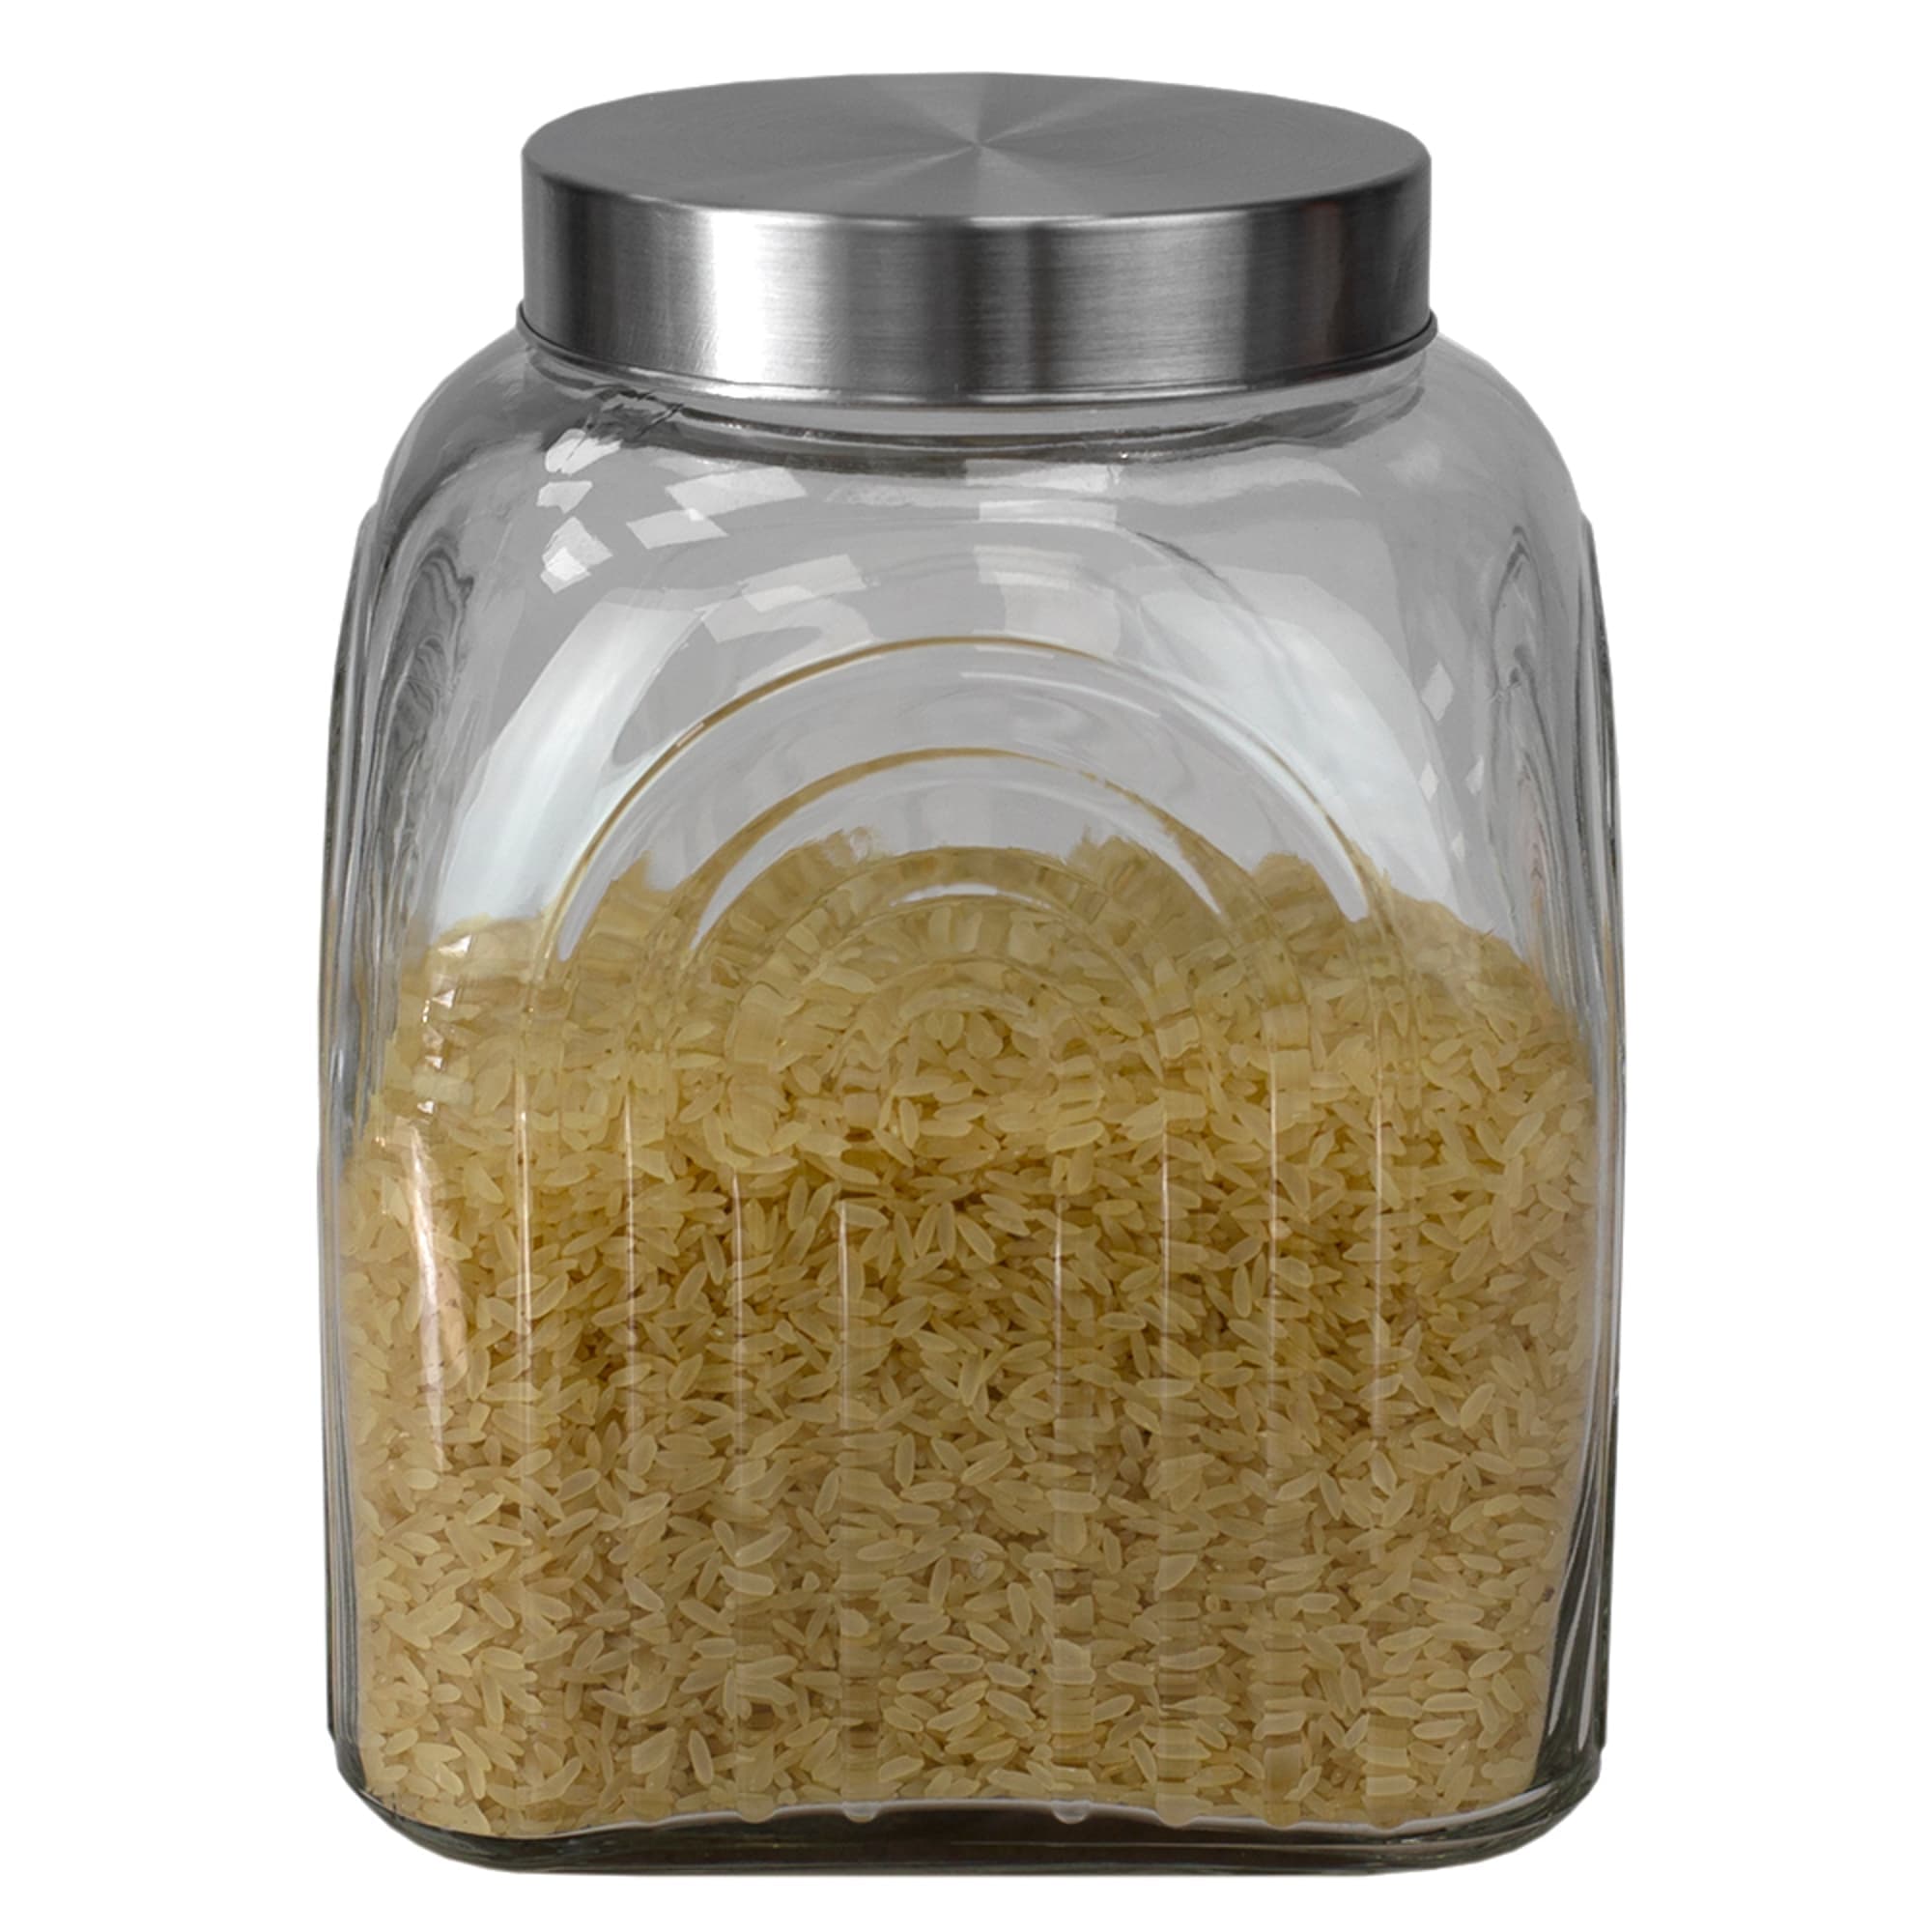 Home Basics Heritage 3.5 LT Glass Jar with Silver Lid $6.00 EACH, CASE PACK OF 6